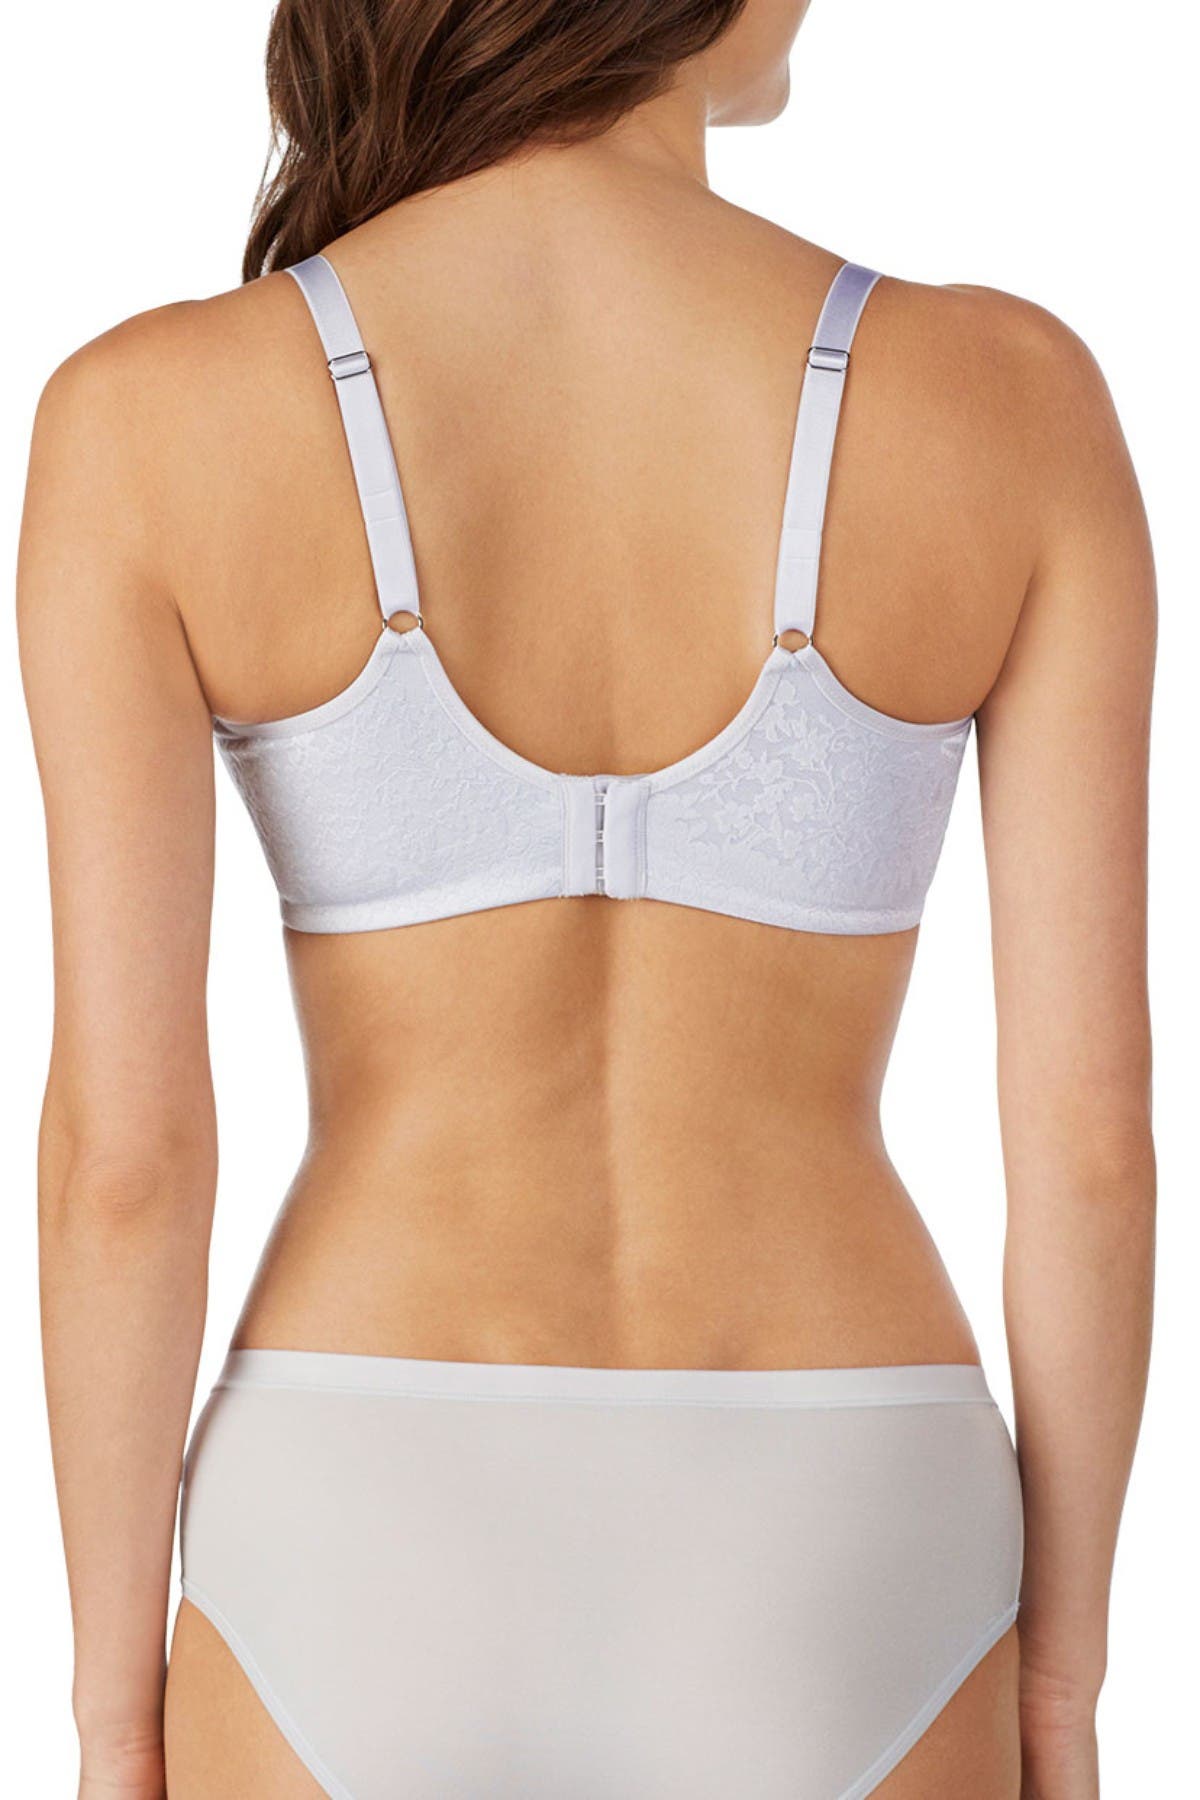 Le Mystere Womens Smooth Profile Minimizer